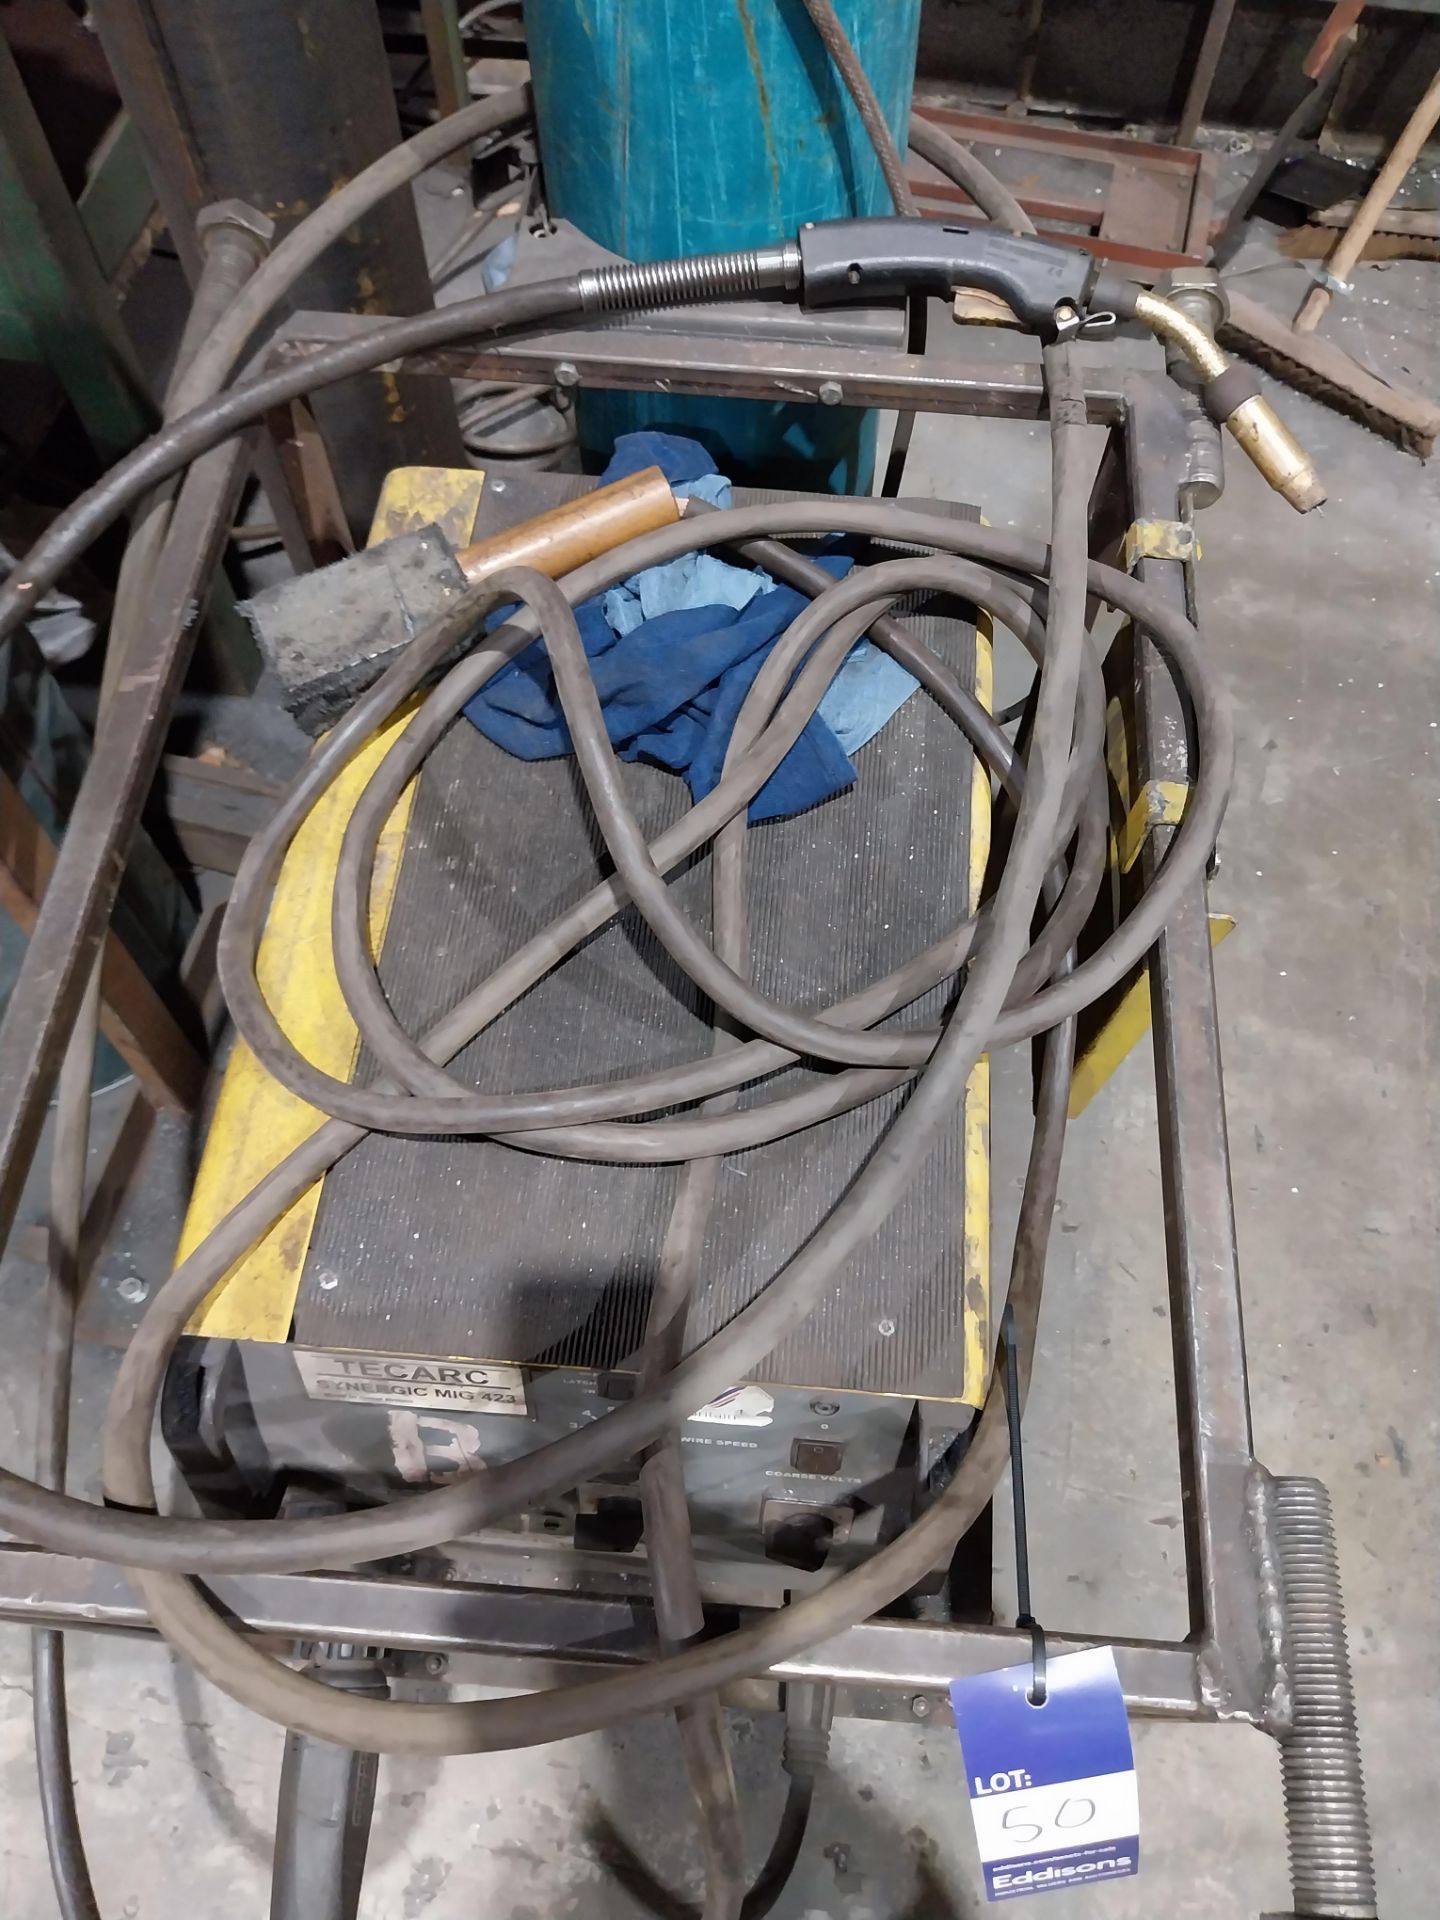 TecArc Synergic mig 423 mig welder with torch and clamp (bottle not included) - Image 3 of 4